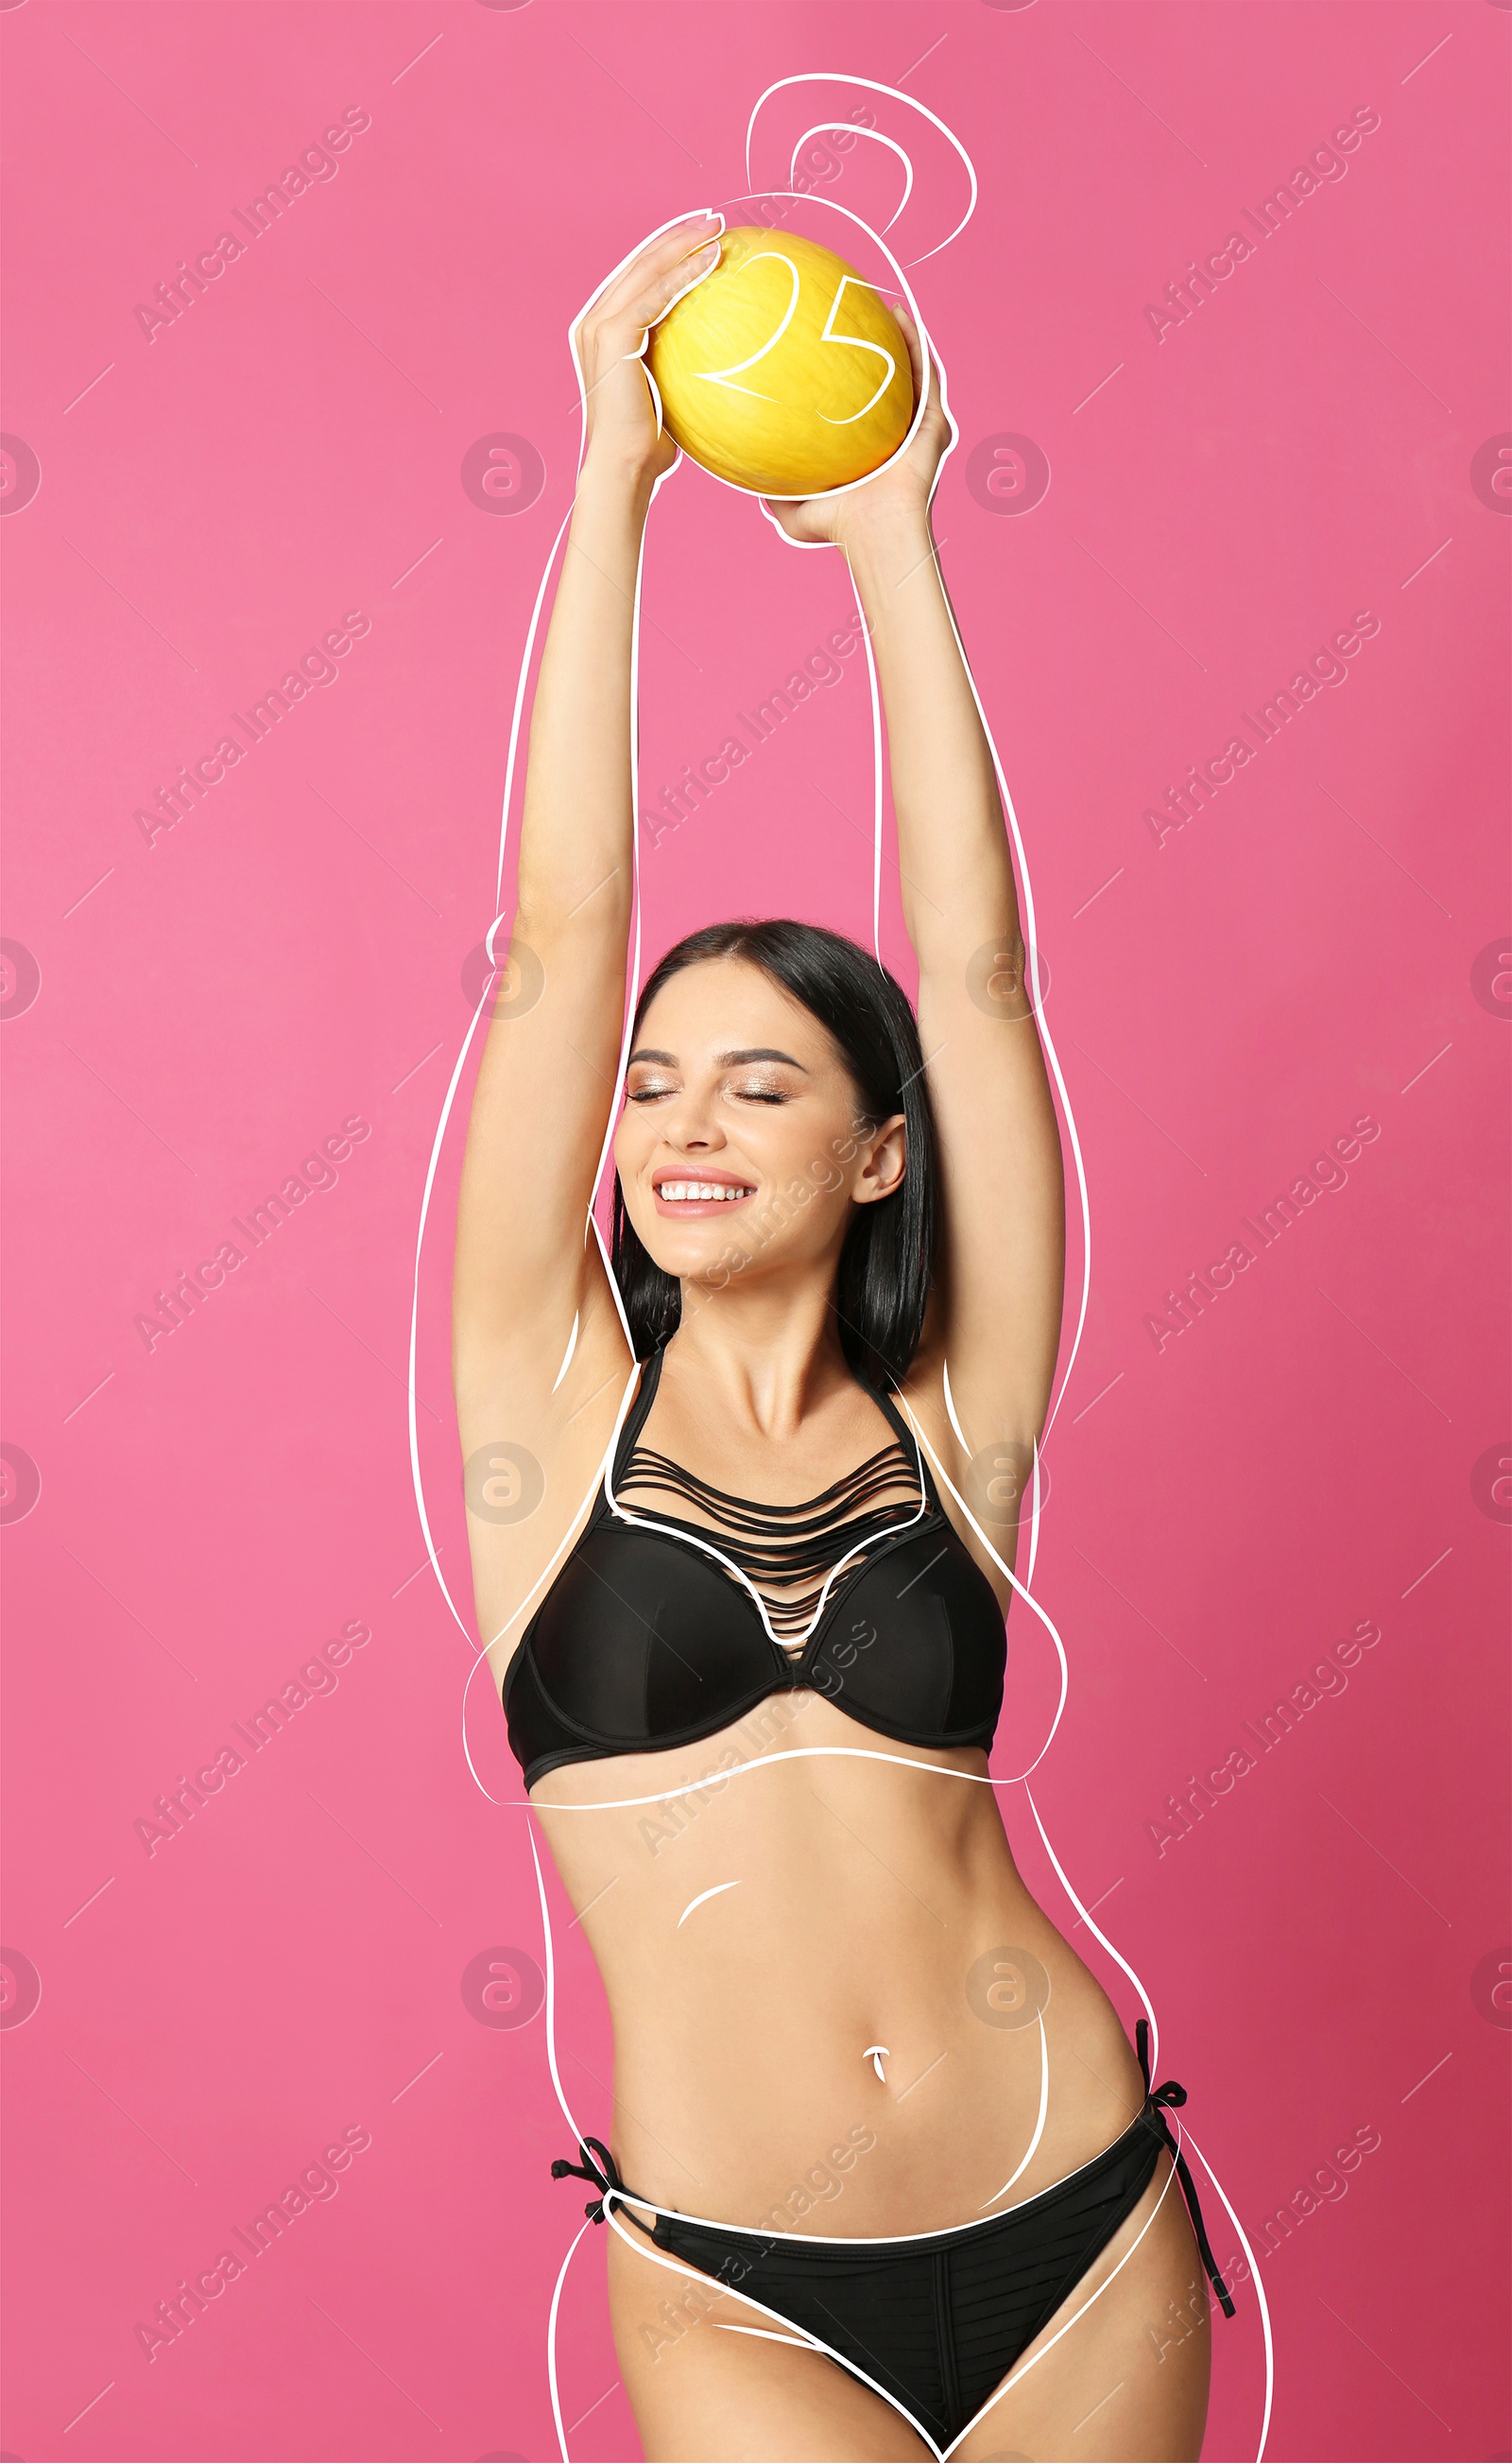 Image of Beautiful slim woman in swimsuit holding melon on pink background. Outline with kettlebell as her overweight figure before workout